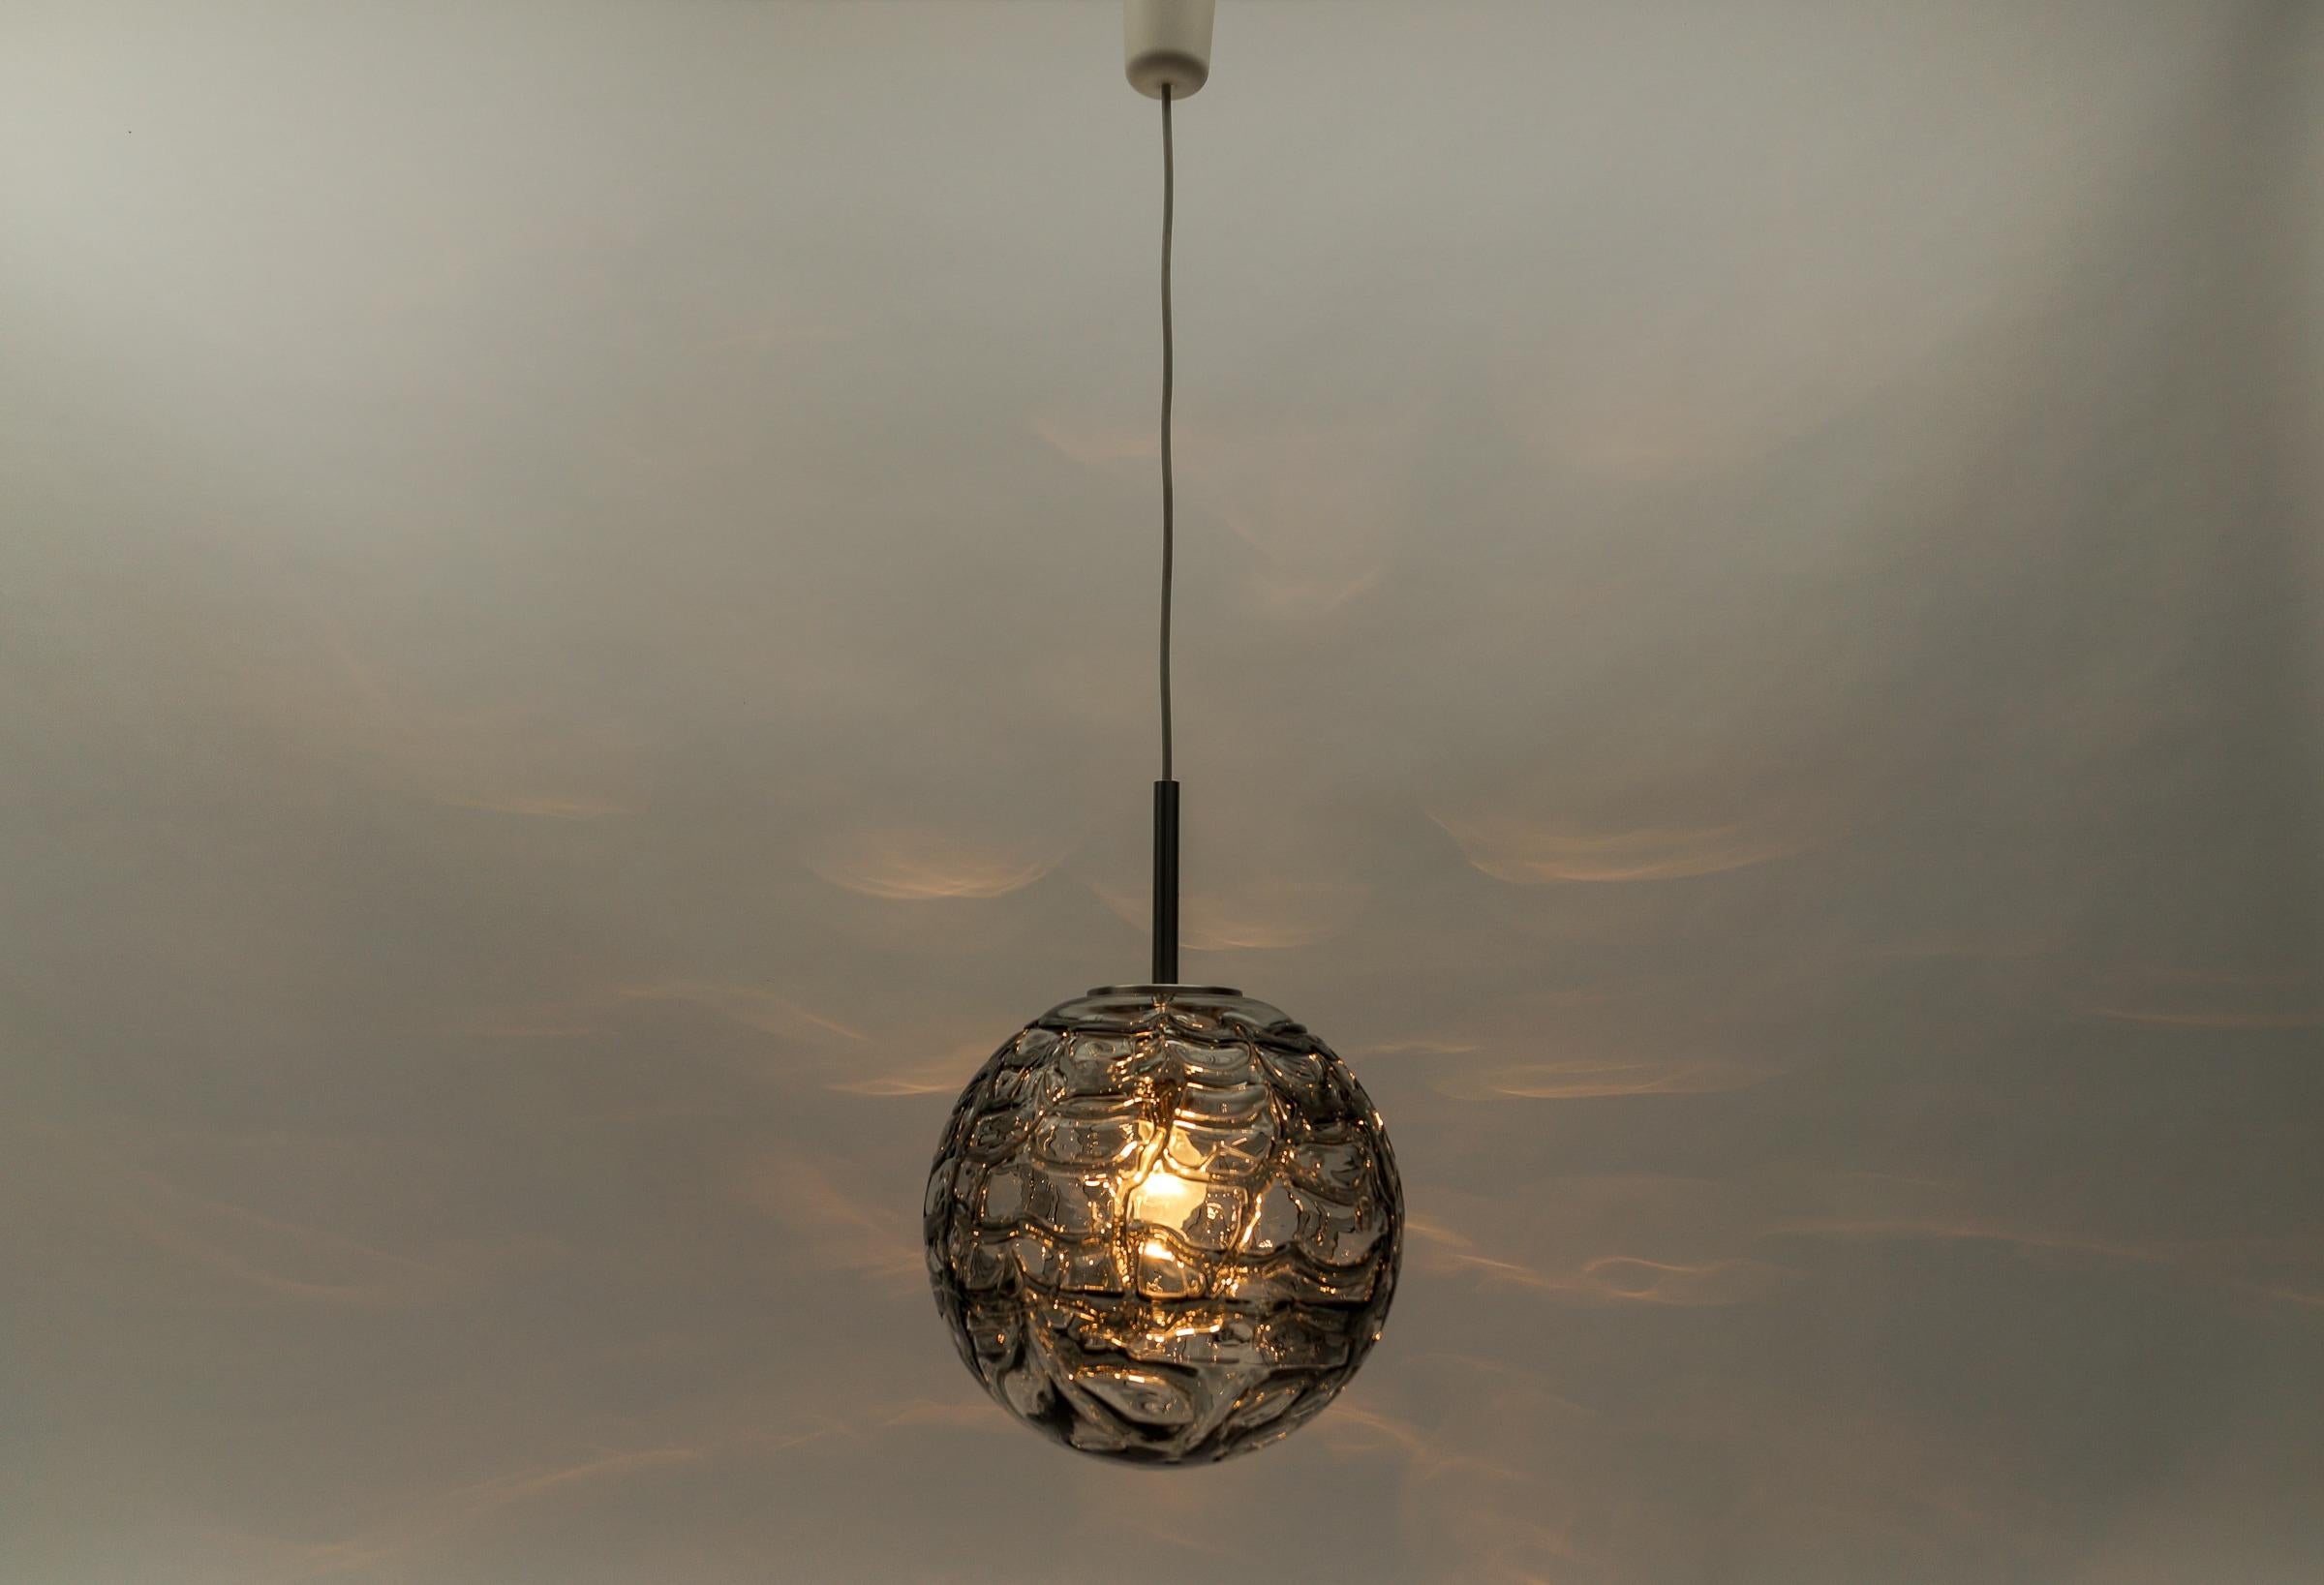 Mid-Century Modern Lovely Black Murano Glass Ball Pendant Lamp by Doria, - 1960s Germany For Sale